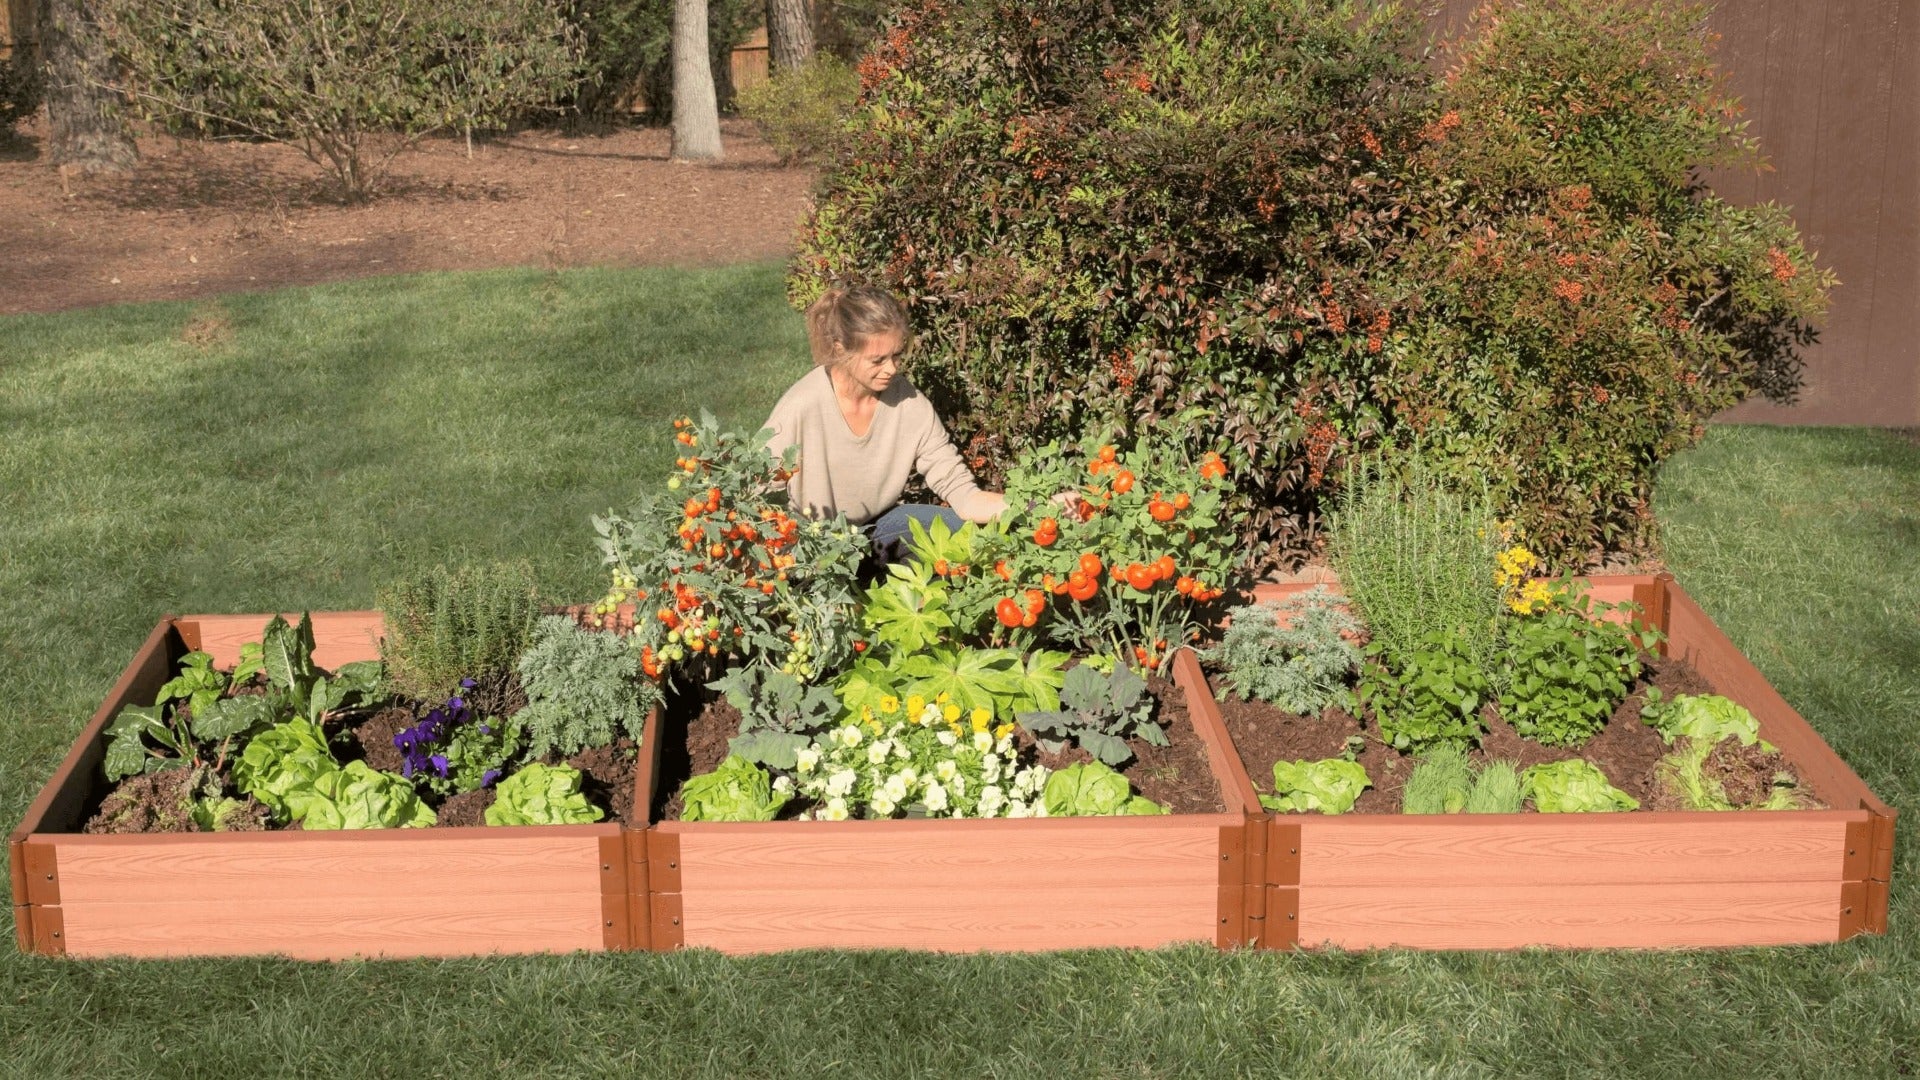 Tool-Free 4' x 12' Raised Garden Bed Raised Garden Beds Frame It All Classic Sienna 2